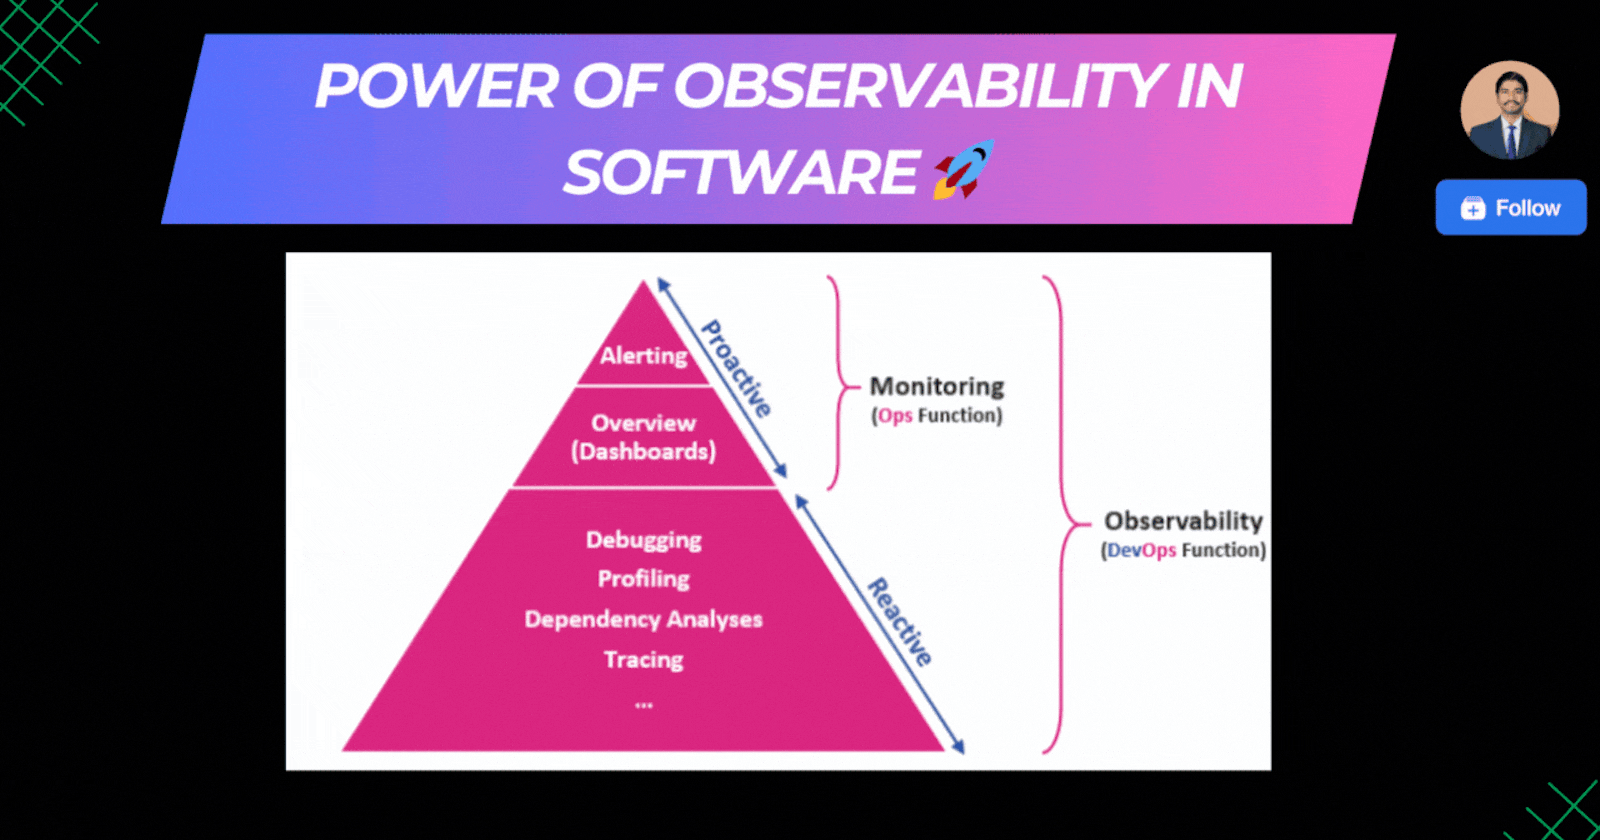 The Power of Observability in Software 🚀